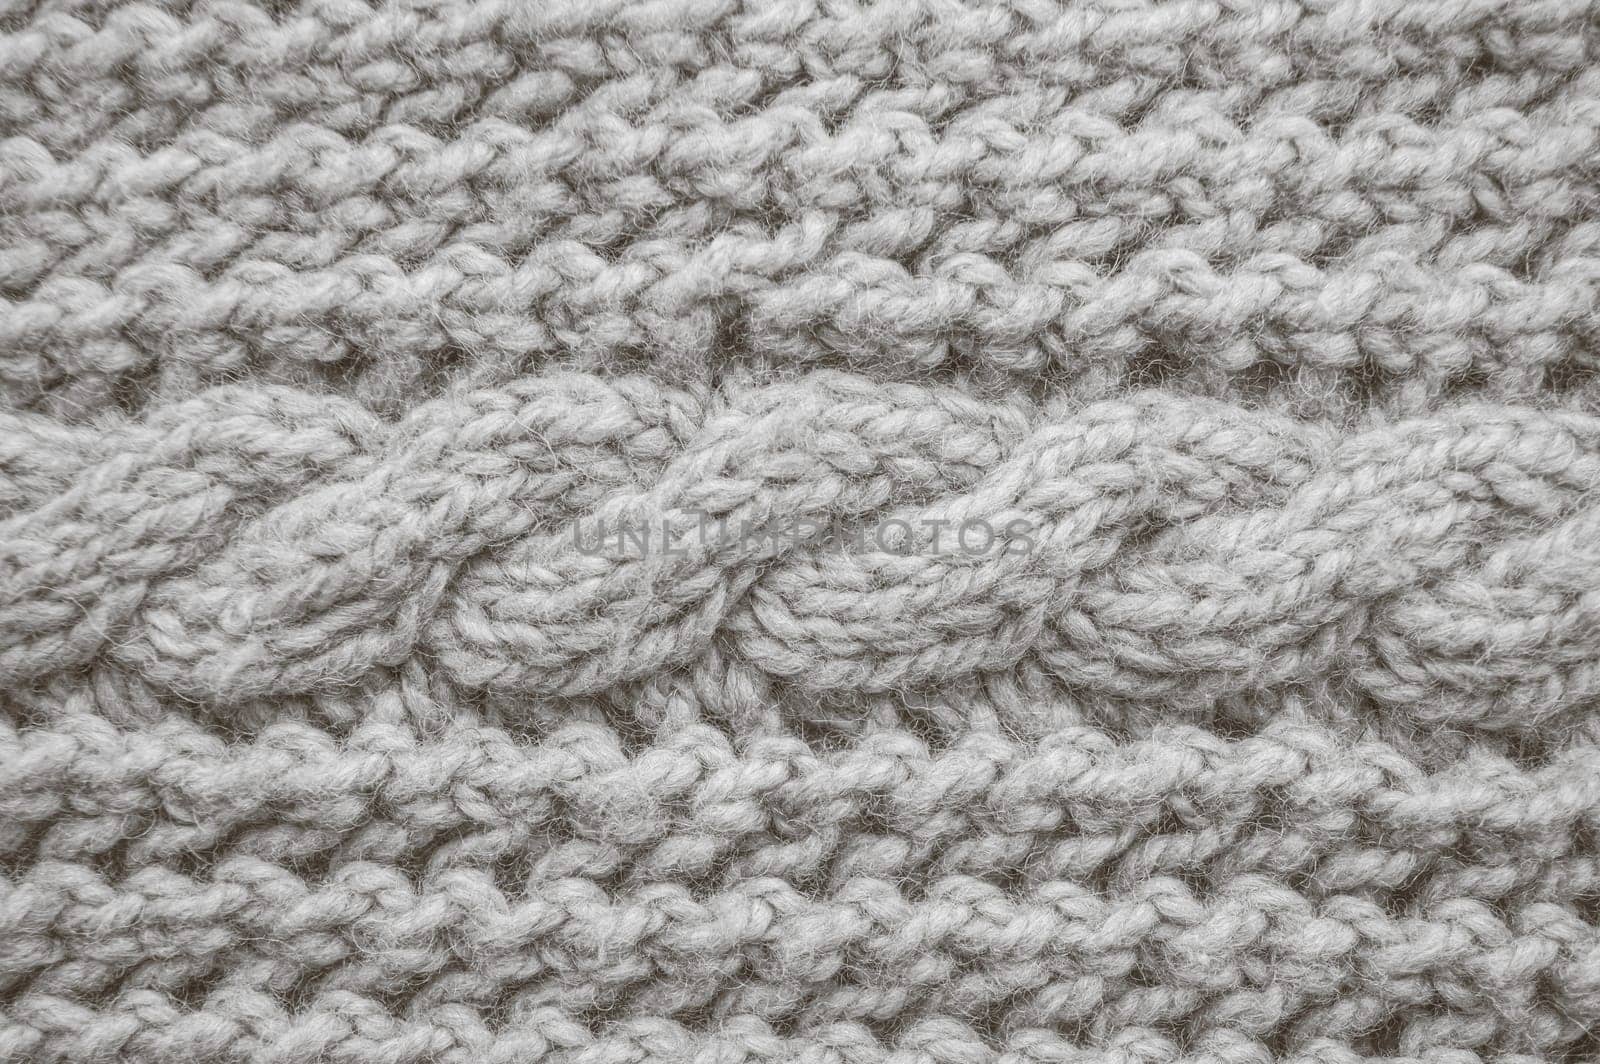 Knitting Texture. Vintage Wool Pullover. Handmade Winter Background. Weave Knitted Texture. Structure Thread. Nordic Xmas Yarn. Cotton Print Material. Closeup Knitted Texture.